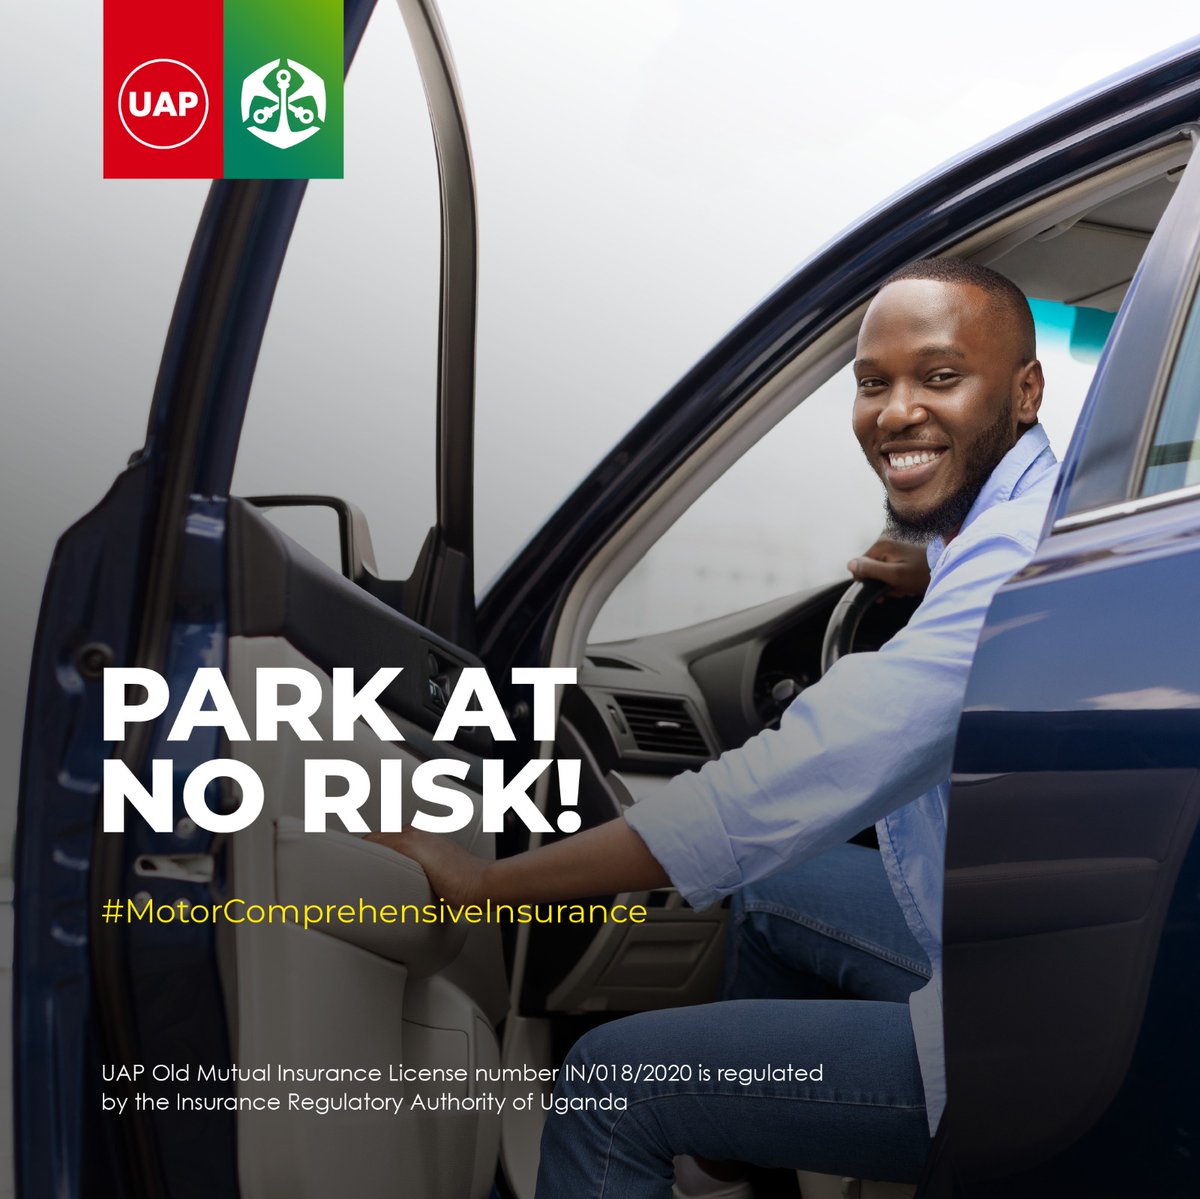 Park with peace of mind 🚗✨ Our motor comprehensive insurance keeps your vehicle safe, even when it's parked. No risks, just confidence. #TutambuleFfena